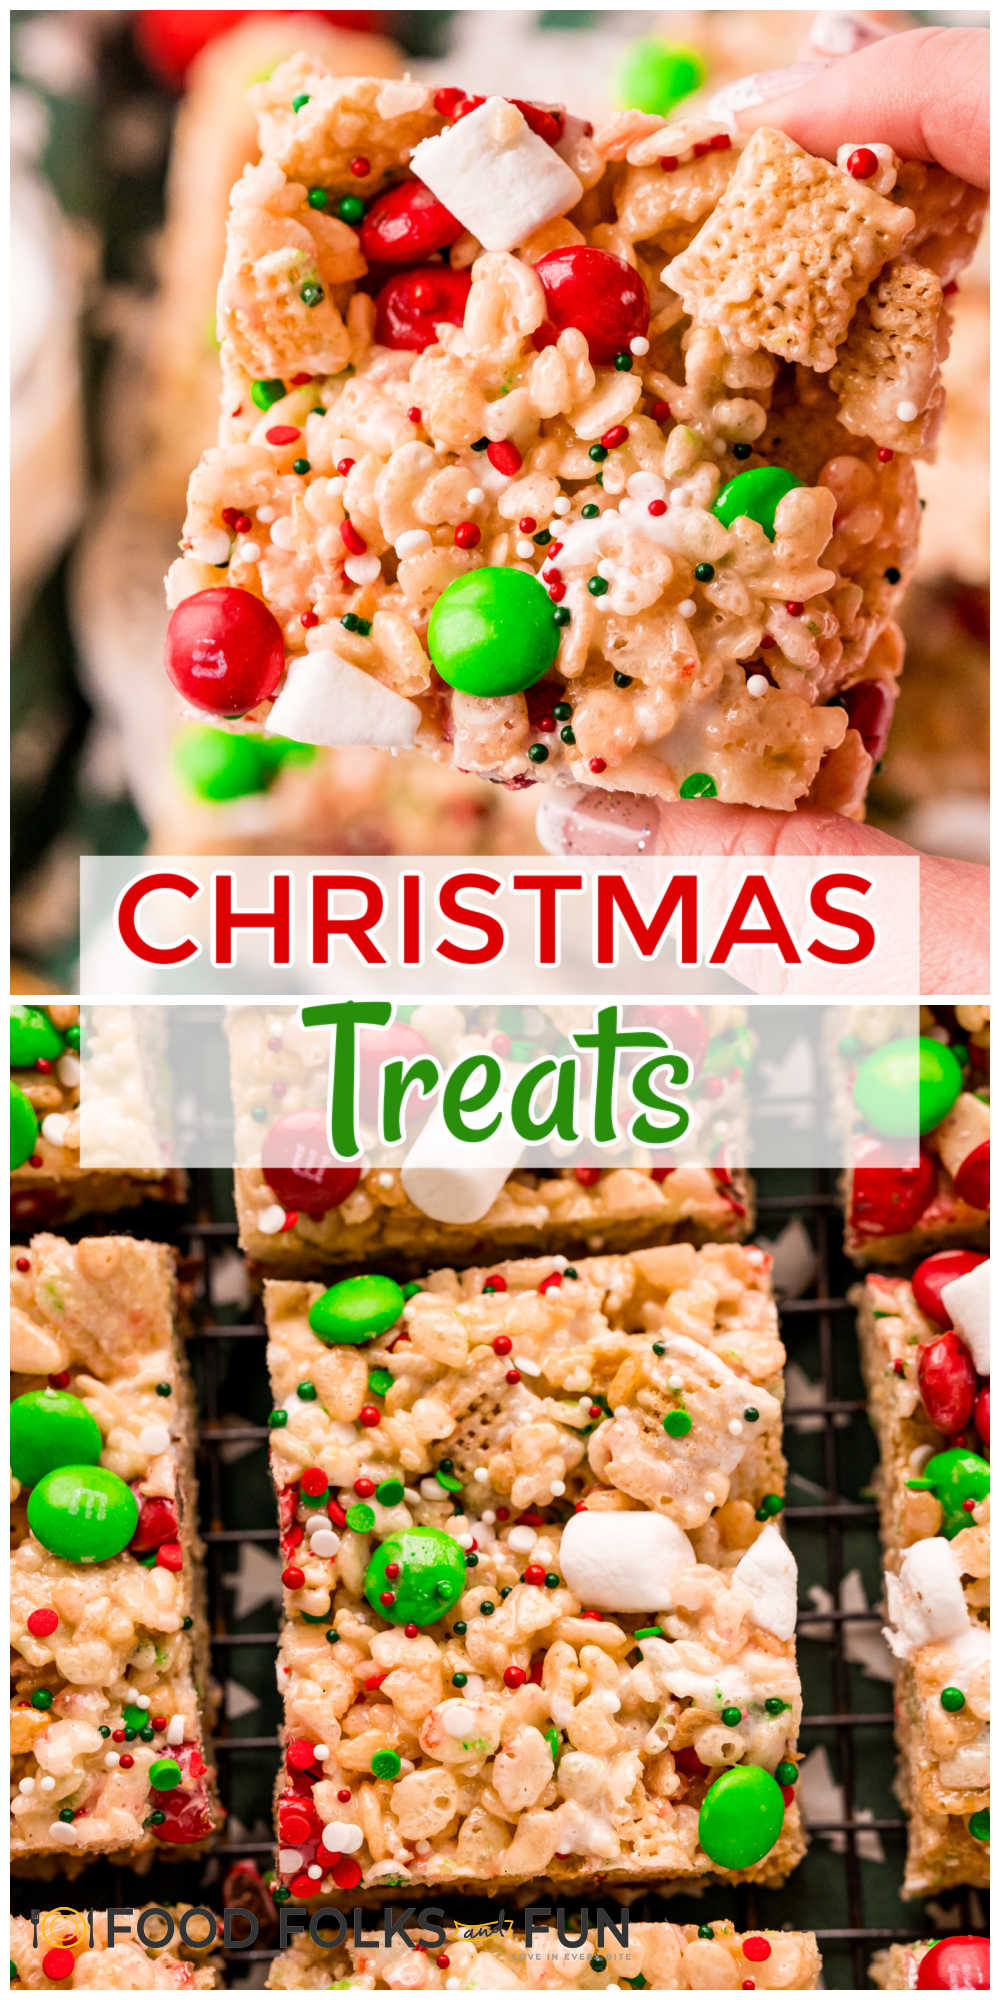 These Christmas Rice Krispie Treats are easy Christmas treats that kids will love. They’re loaded with M&Ms, sprinkles, and mini marshmallows. via @foodfolksandfun